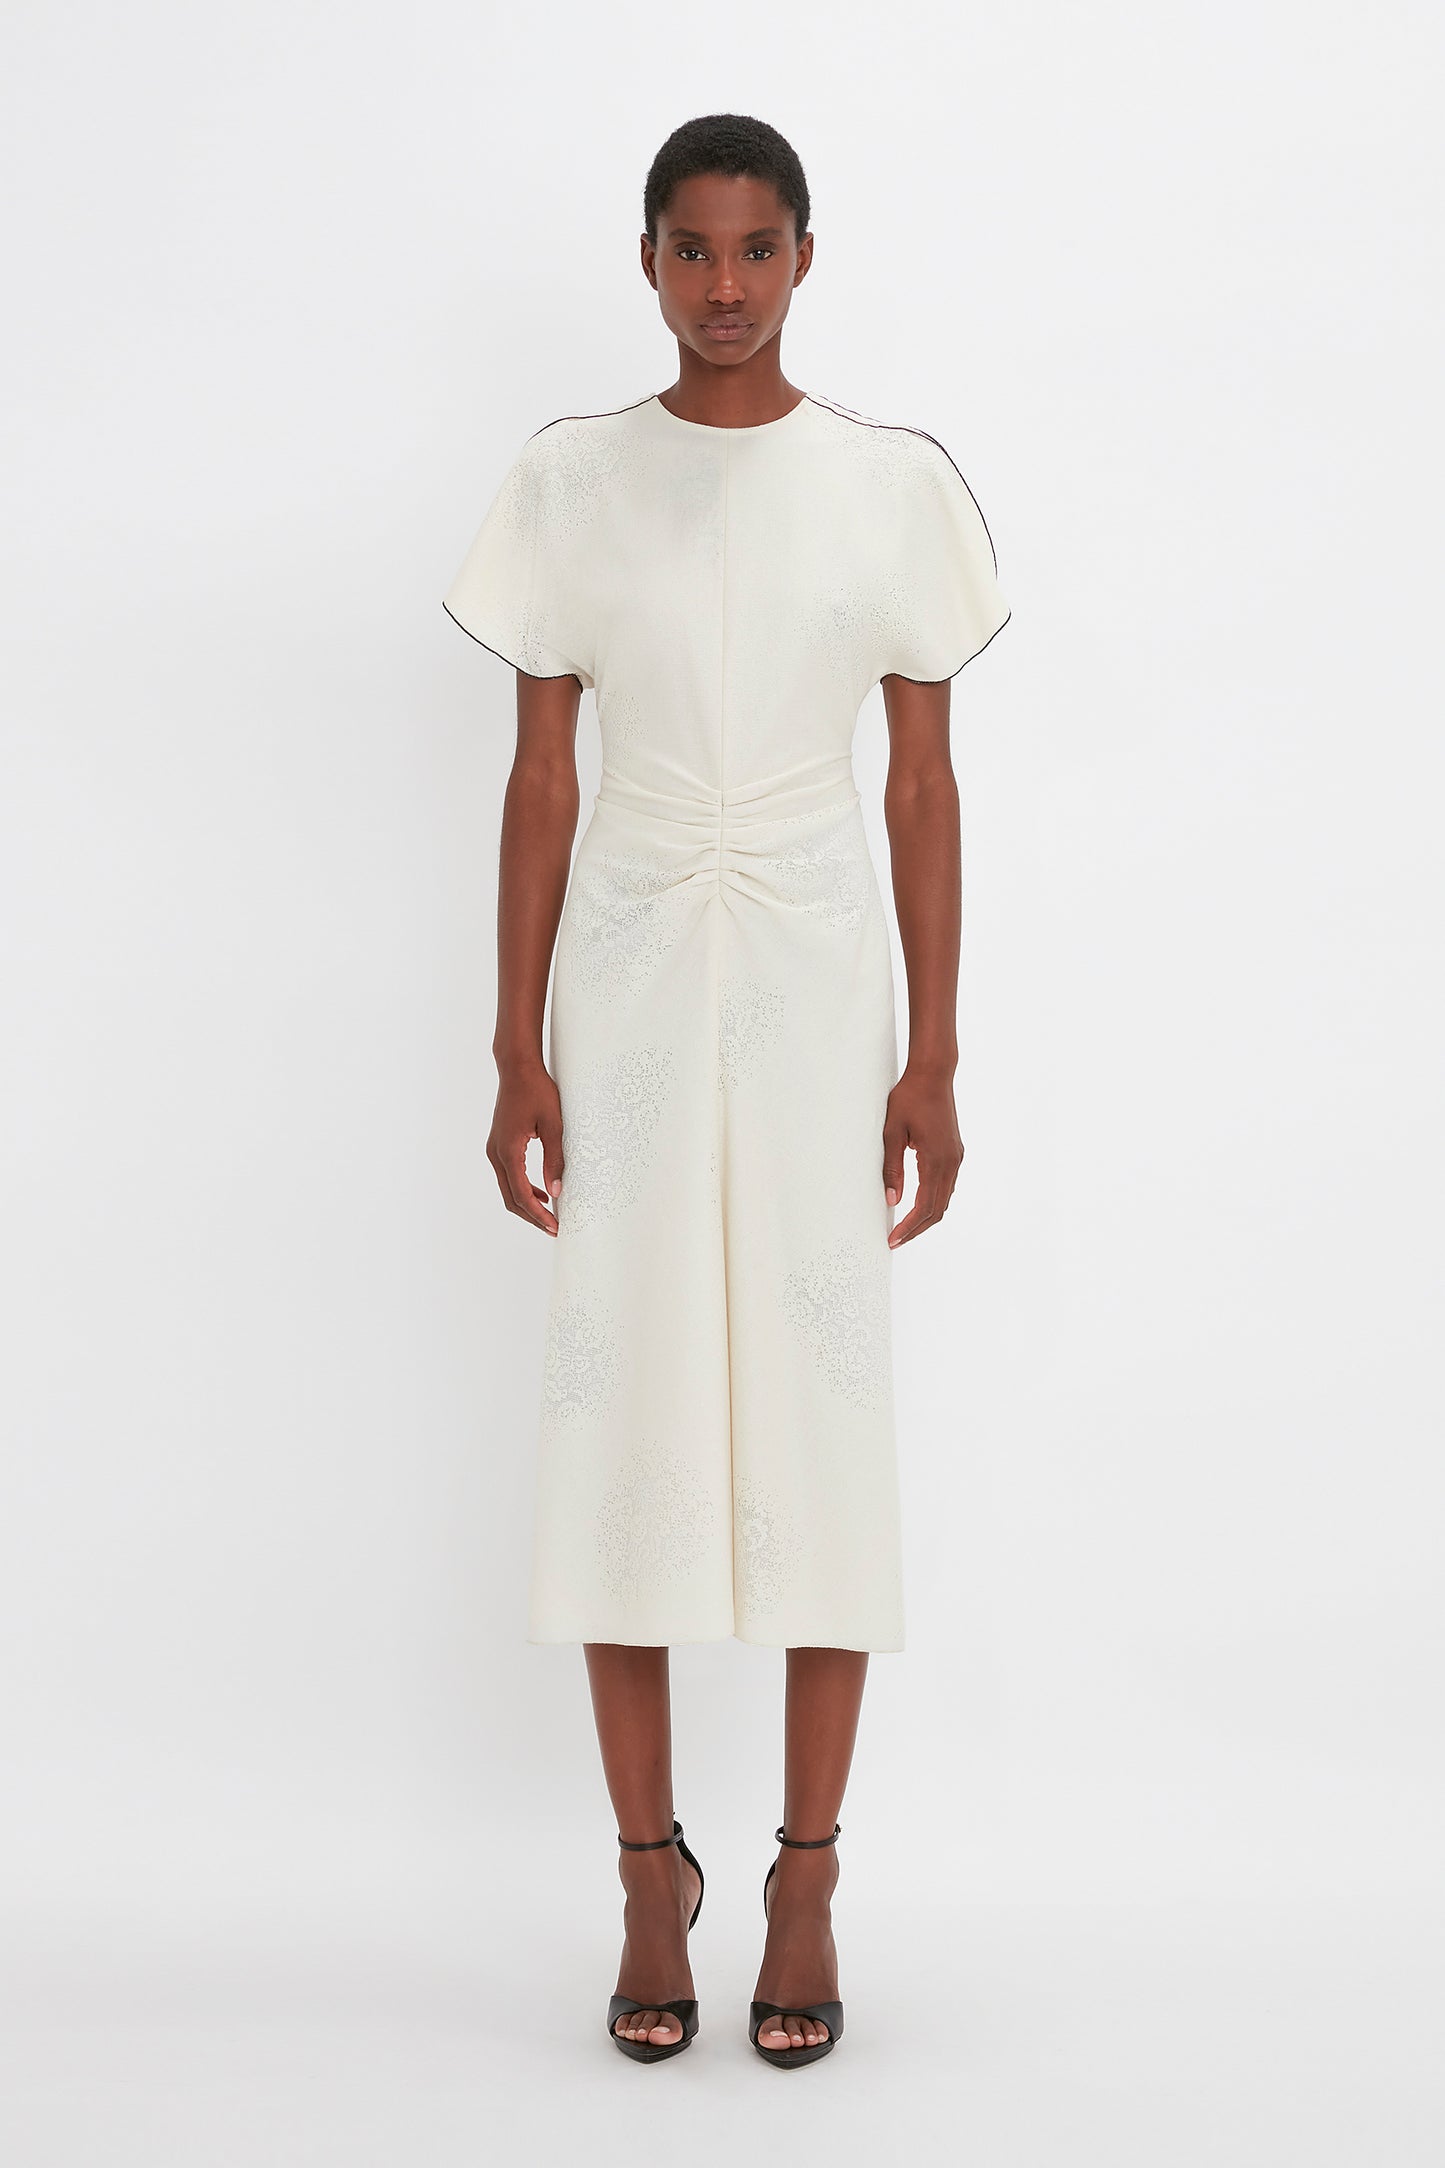 A woman stands against a white background, modeling a cream Victoria Beckham gathered waist midi dress with short sleeves and delicate embroidery, paired with pointy toe stiletto sandals.